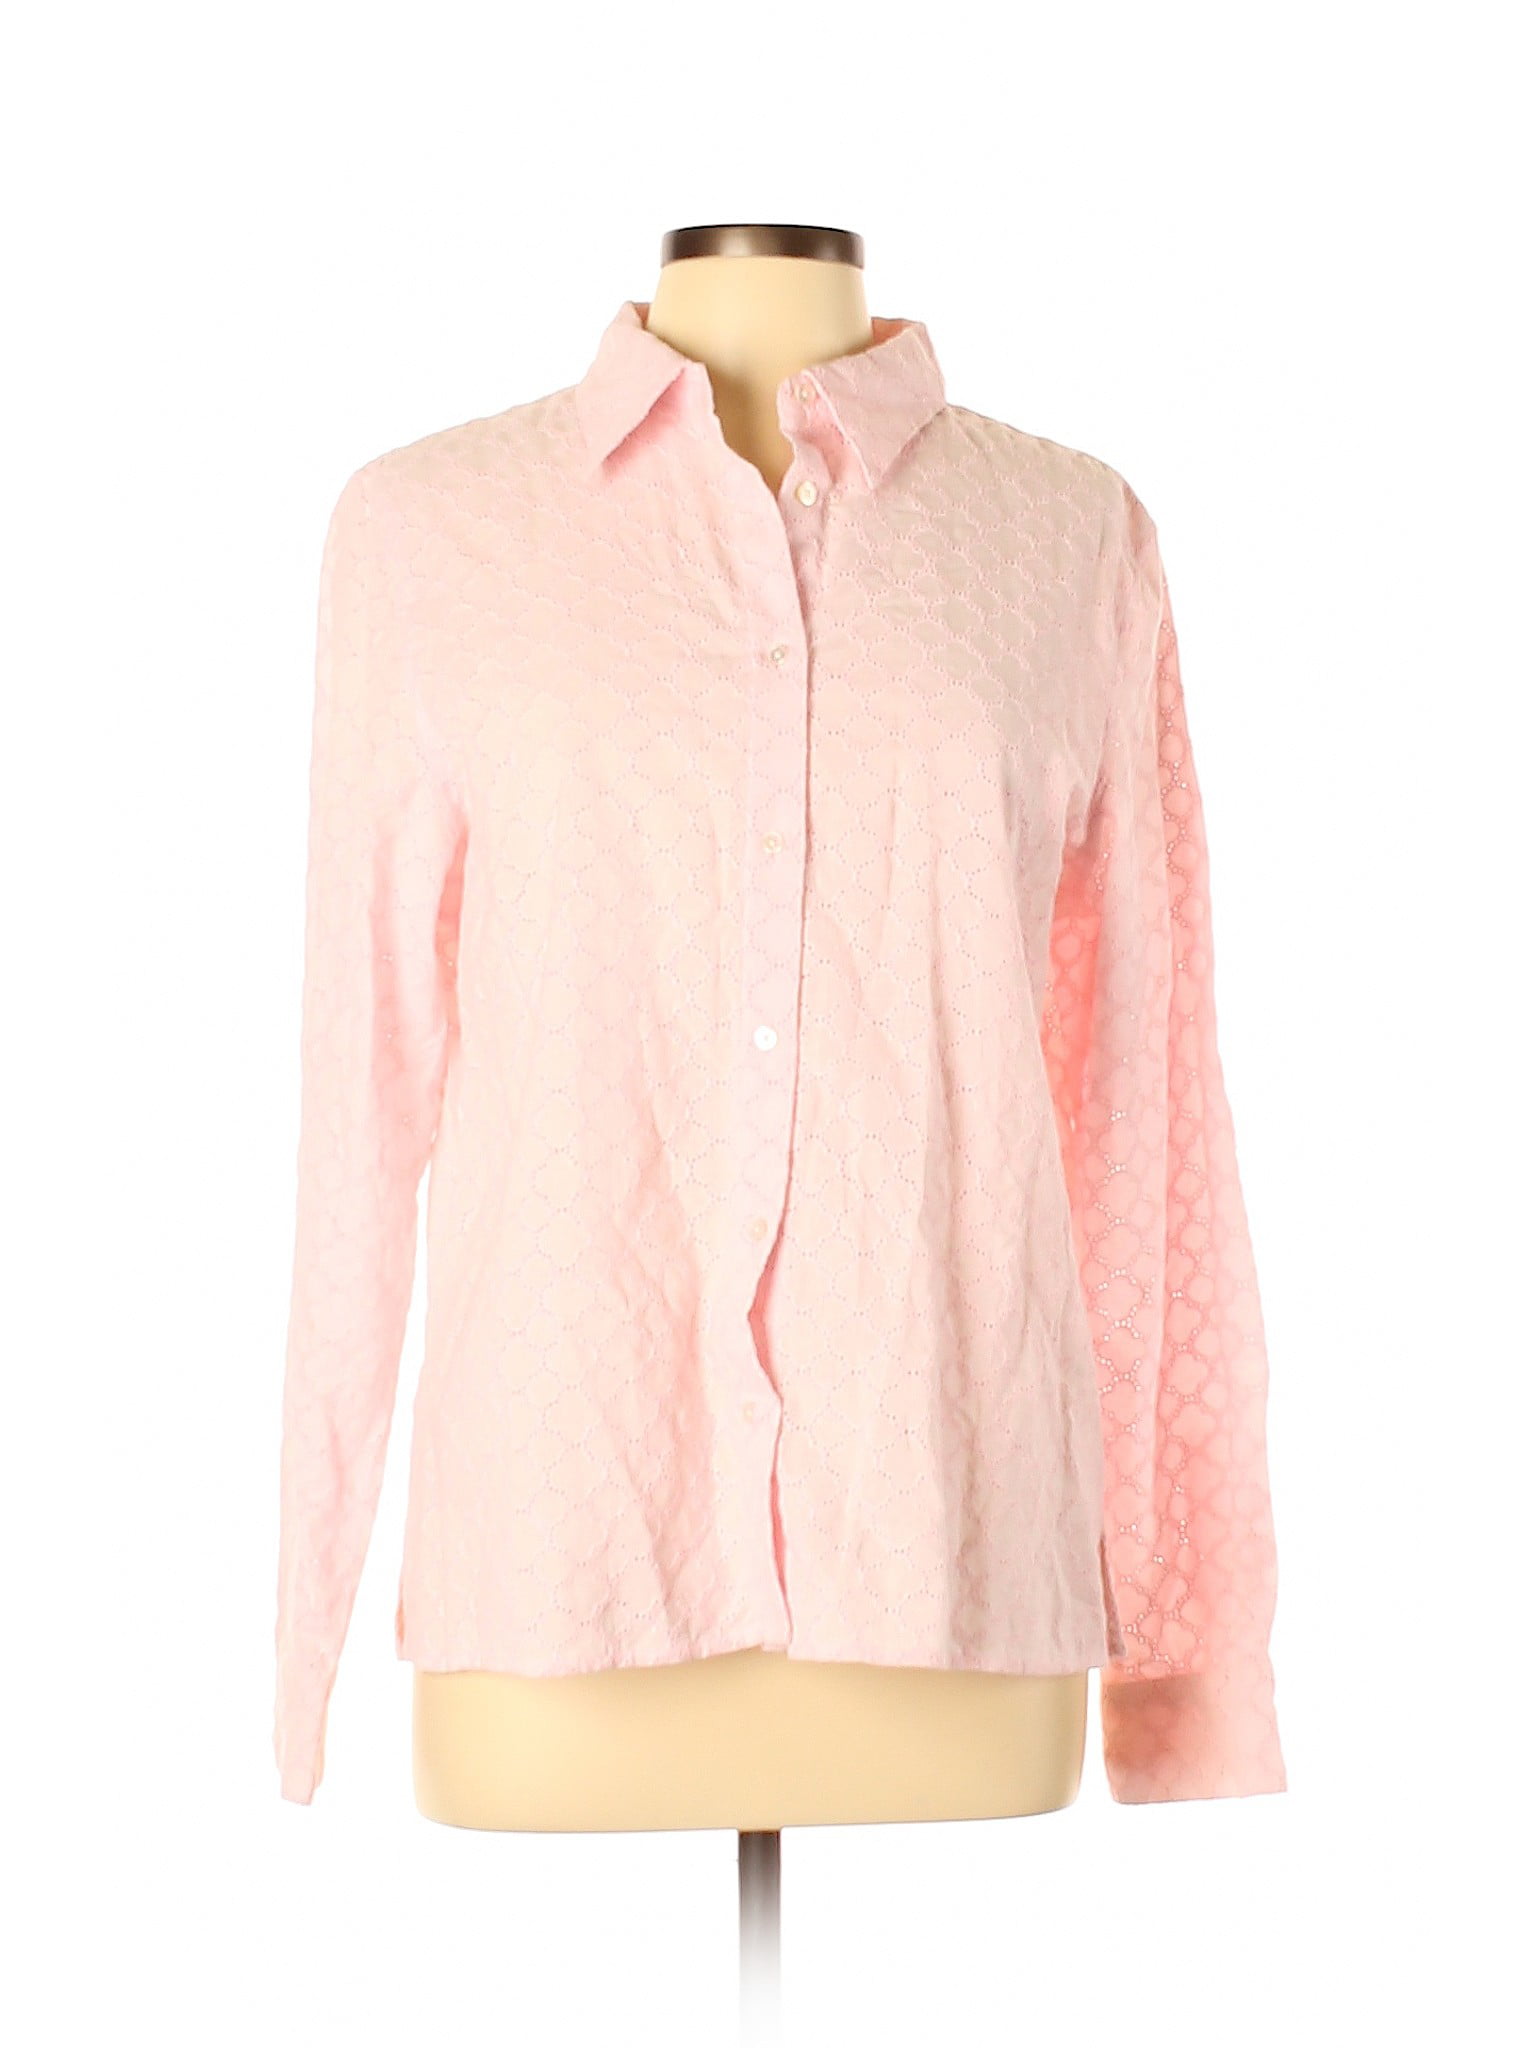 Talbots - Pre-Owned Talbots Women's Size L Long Sleeve Button-Down ...